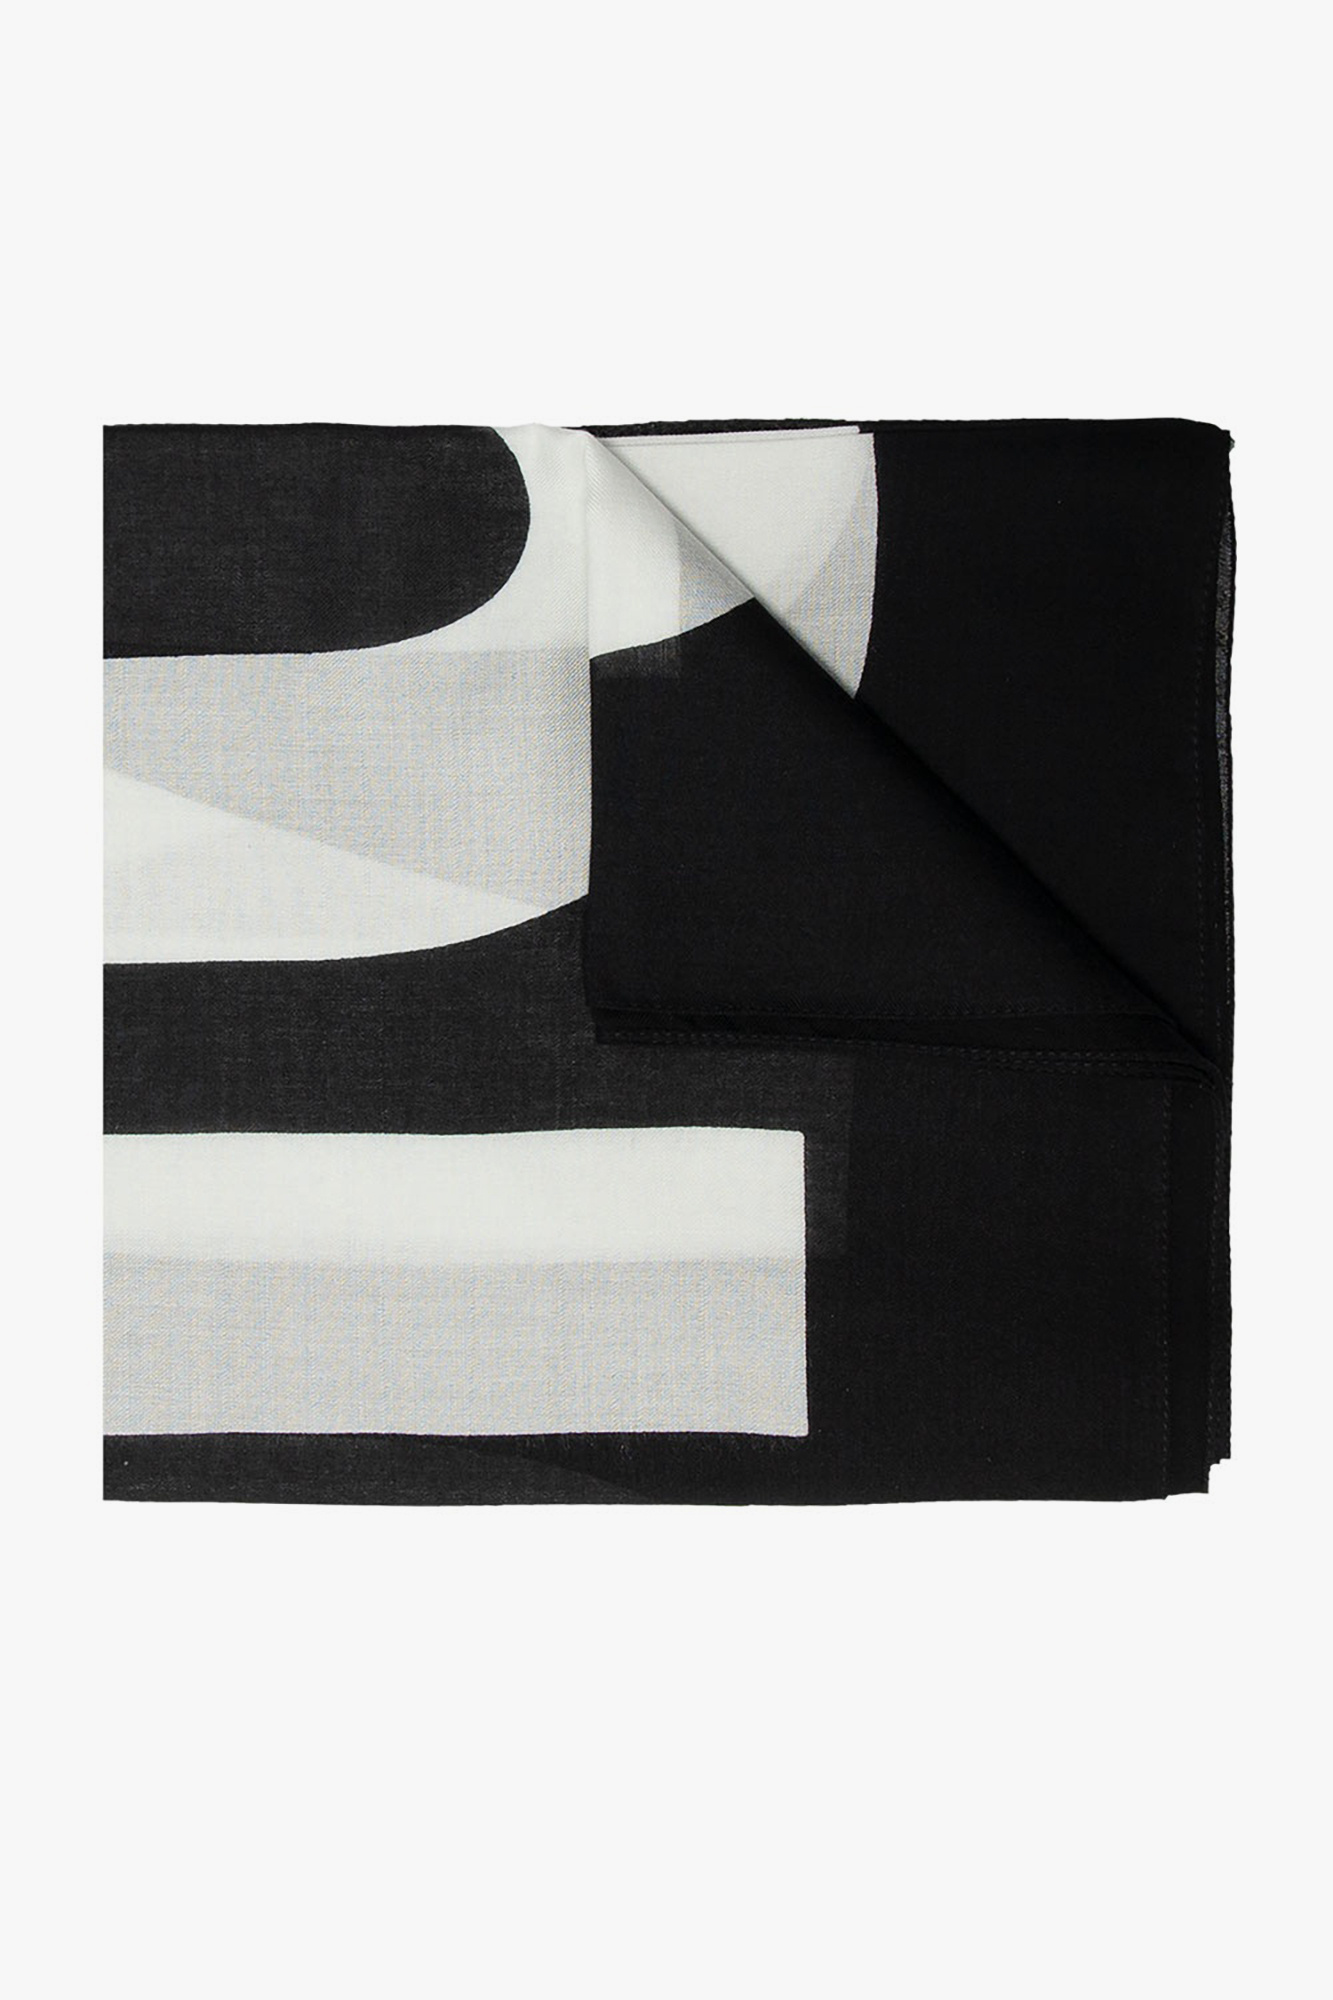 Moschino Black and white scarf from Moschino. Crafted in modal, this item showcases the brand's logo